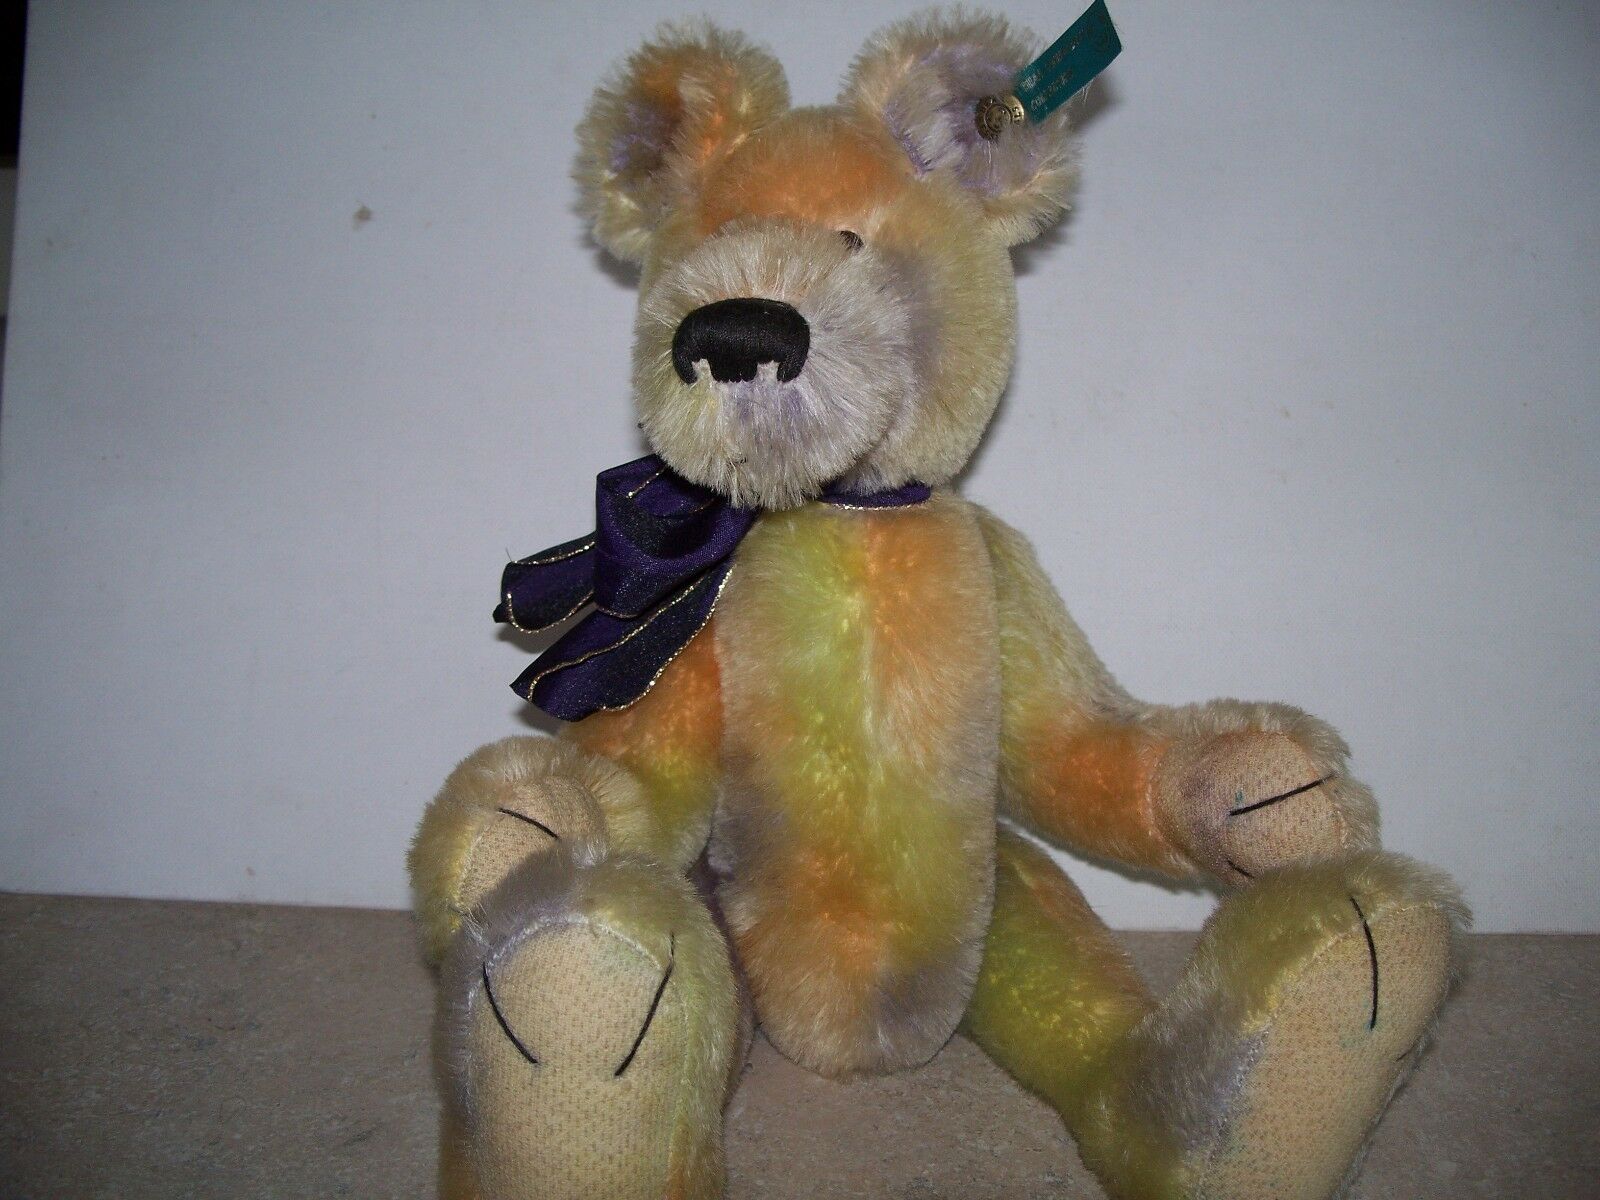 Effanbee Bear Essentials 100% Mohair Rainbow Bear Fully Jointed 14in. Button/Tag